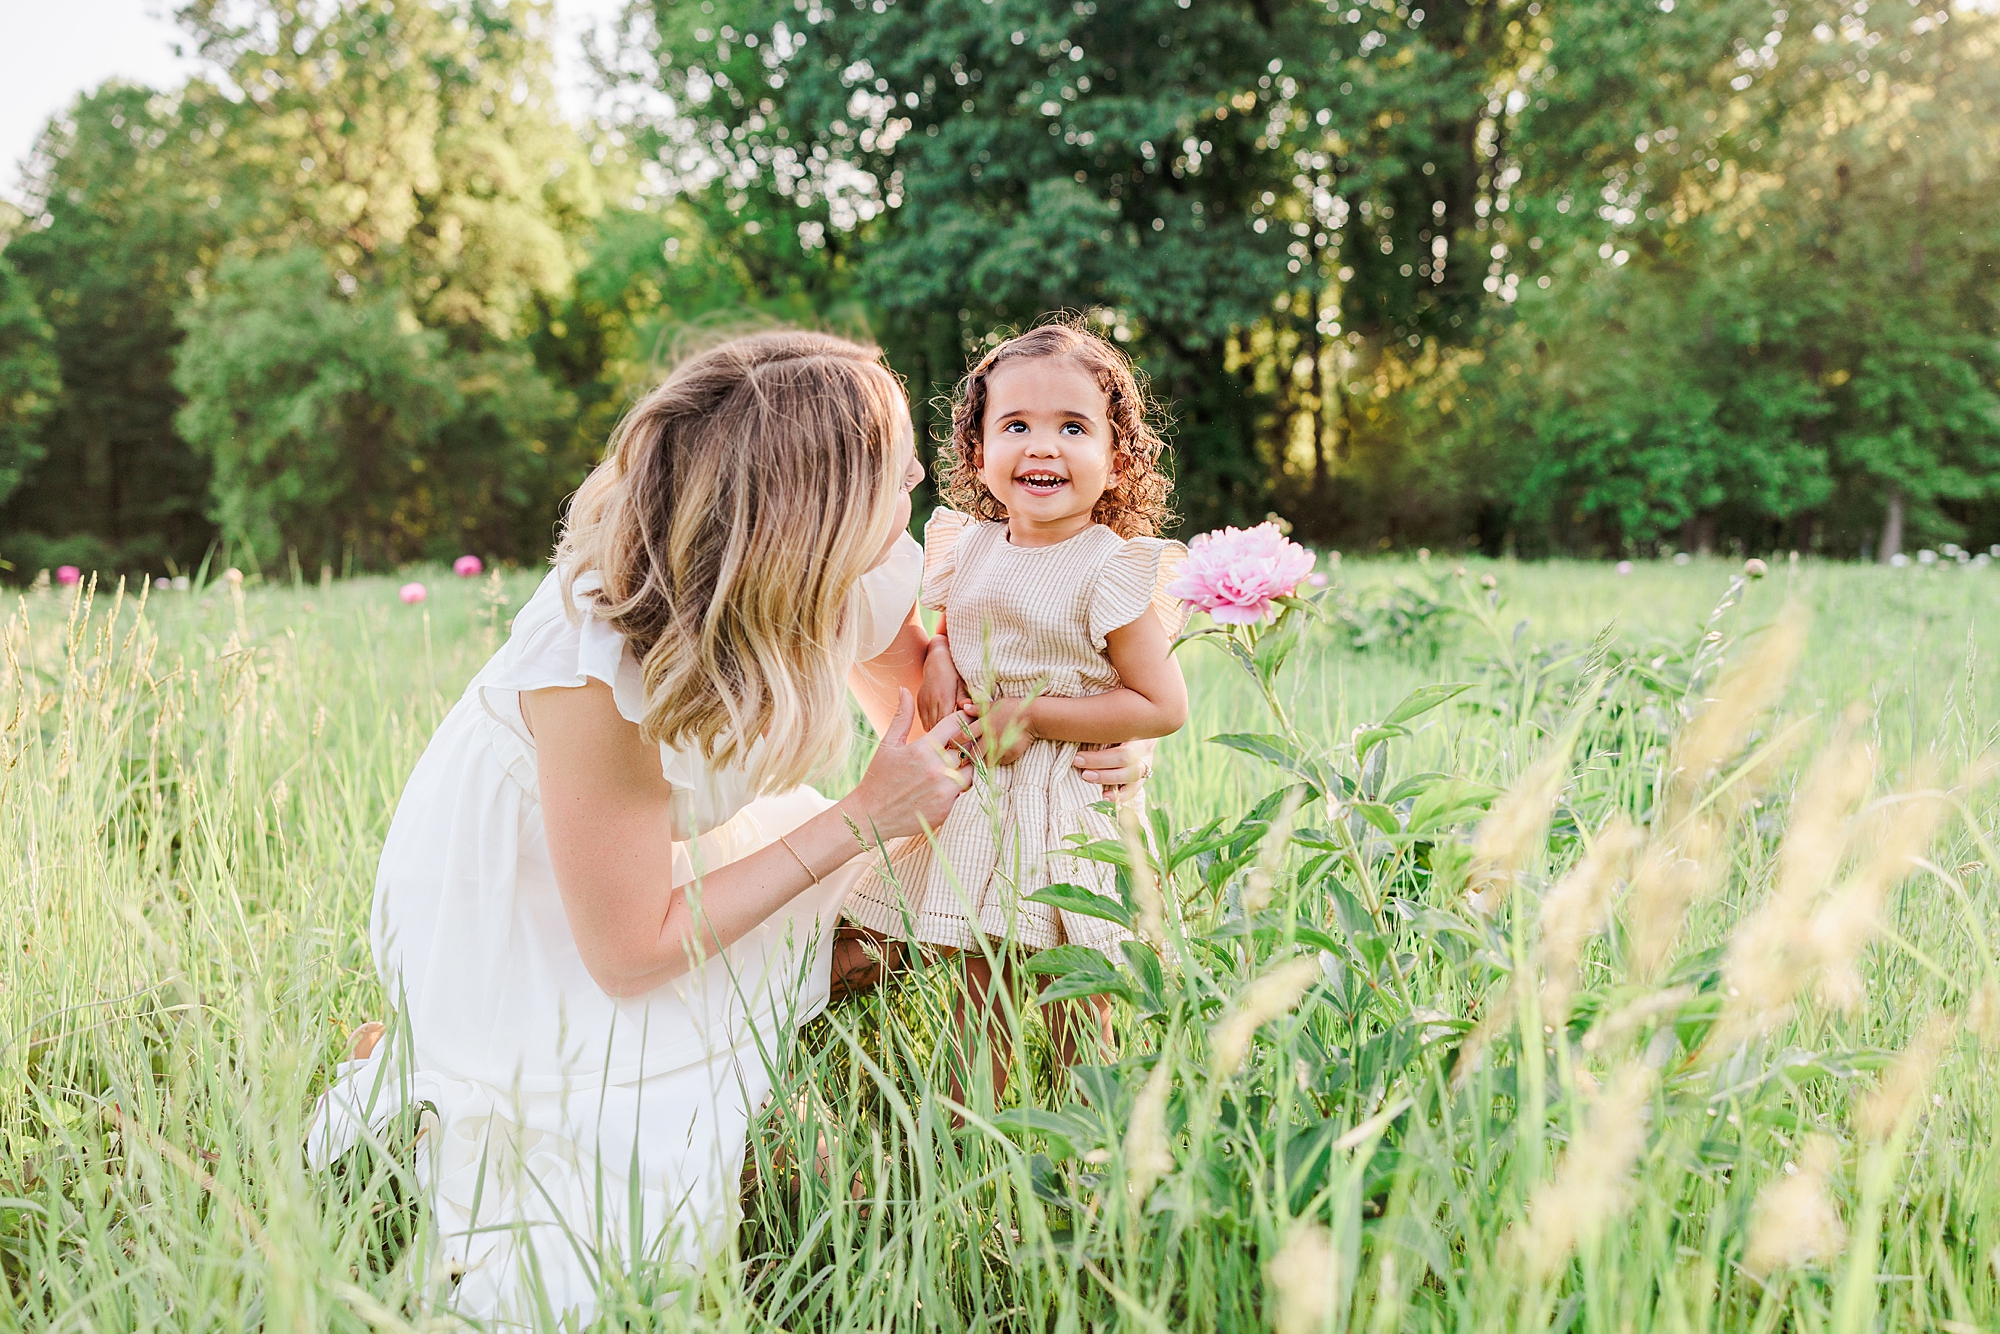 mom poses with daughter in neutral spring outfits in grass